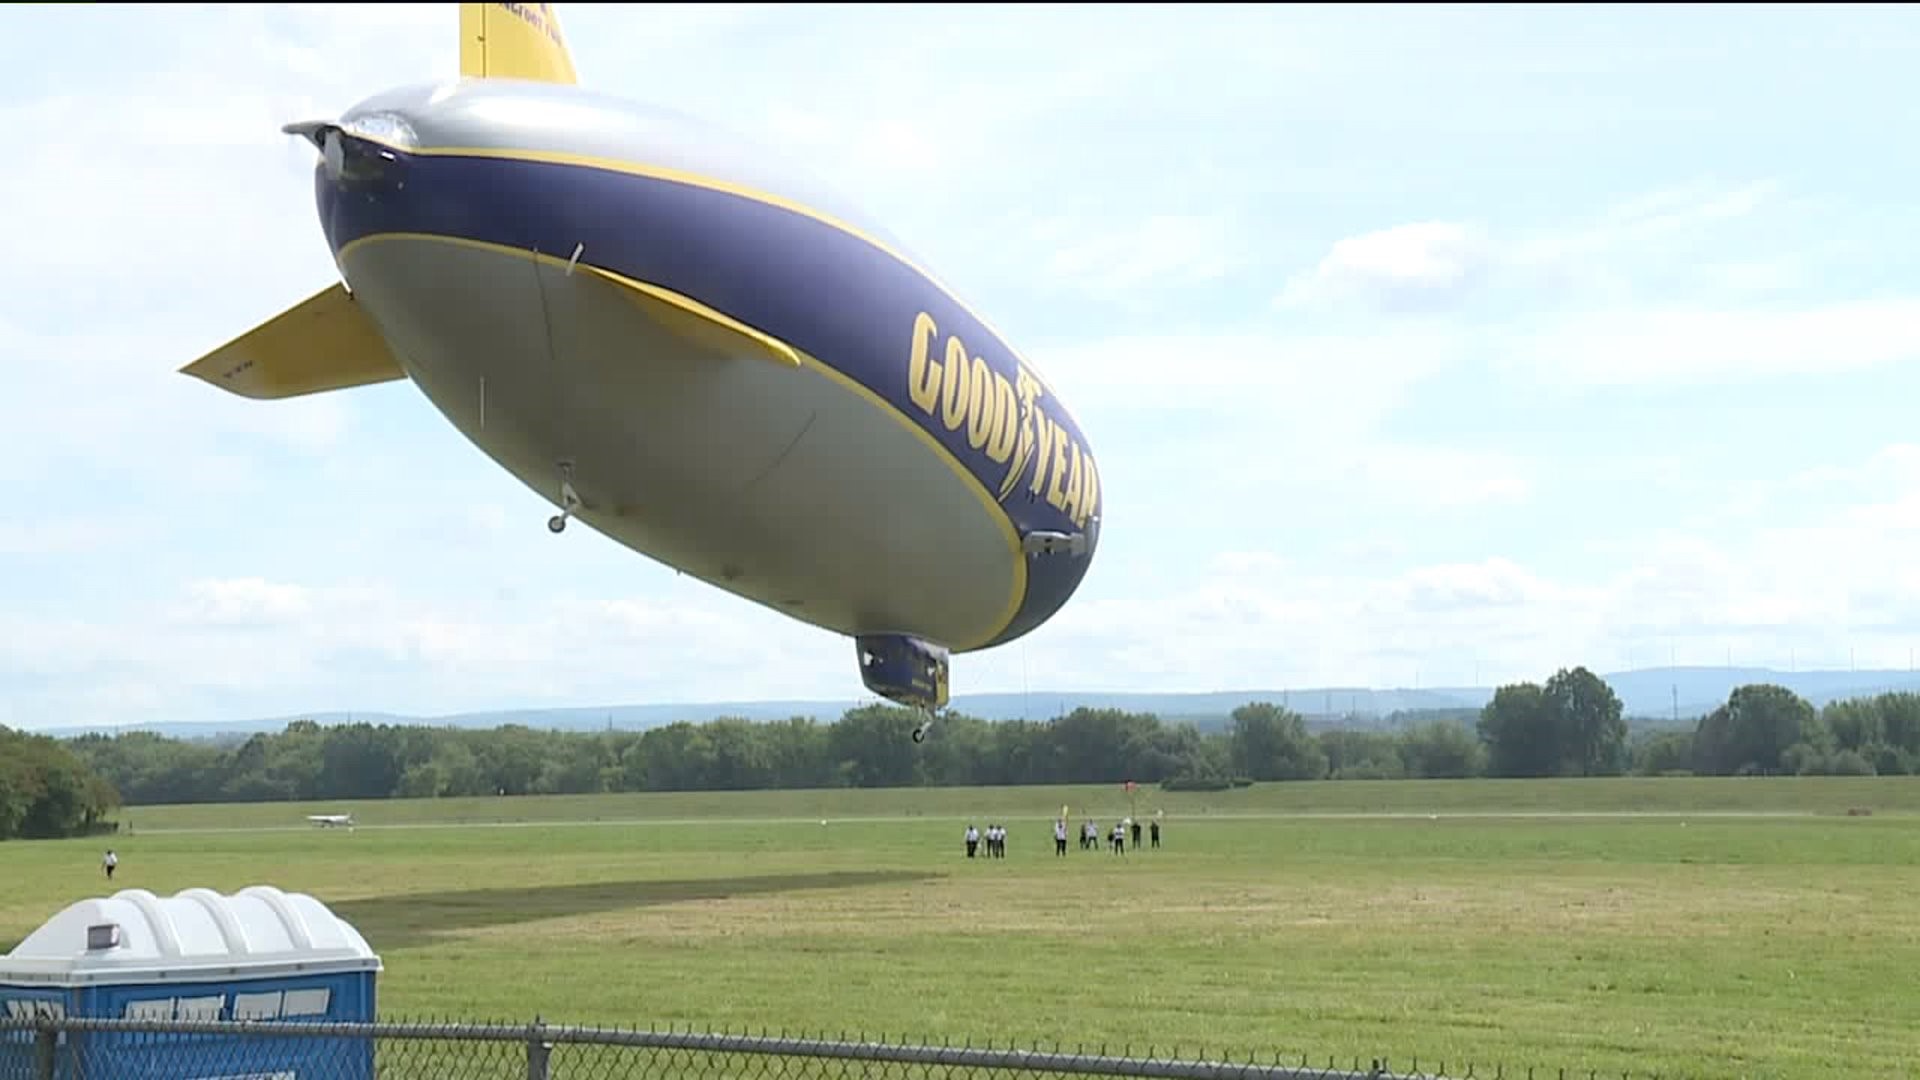 Goodyear Blimp Soars over Wyoming Valley